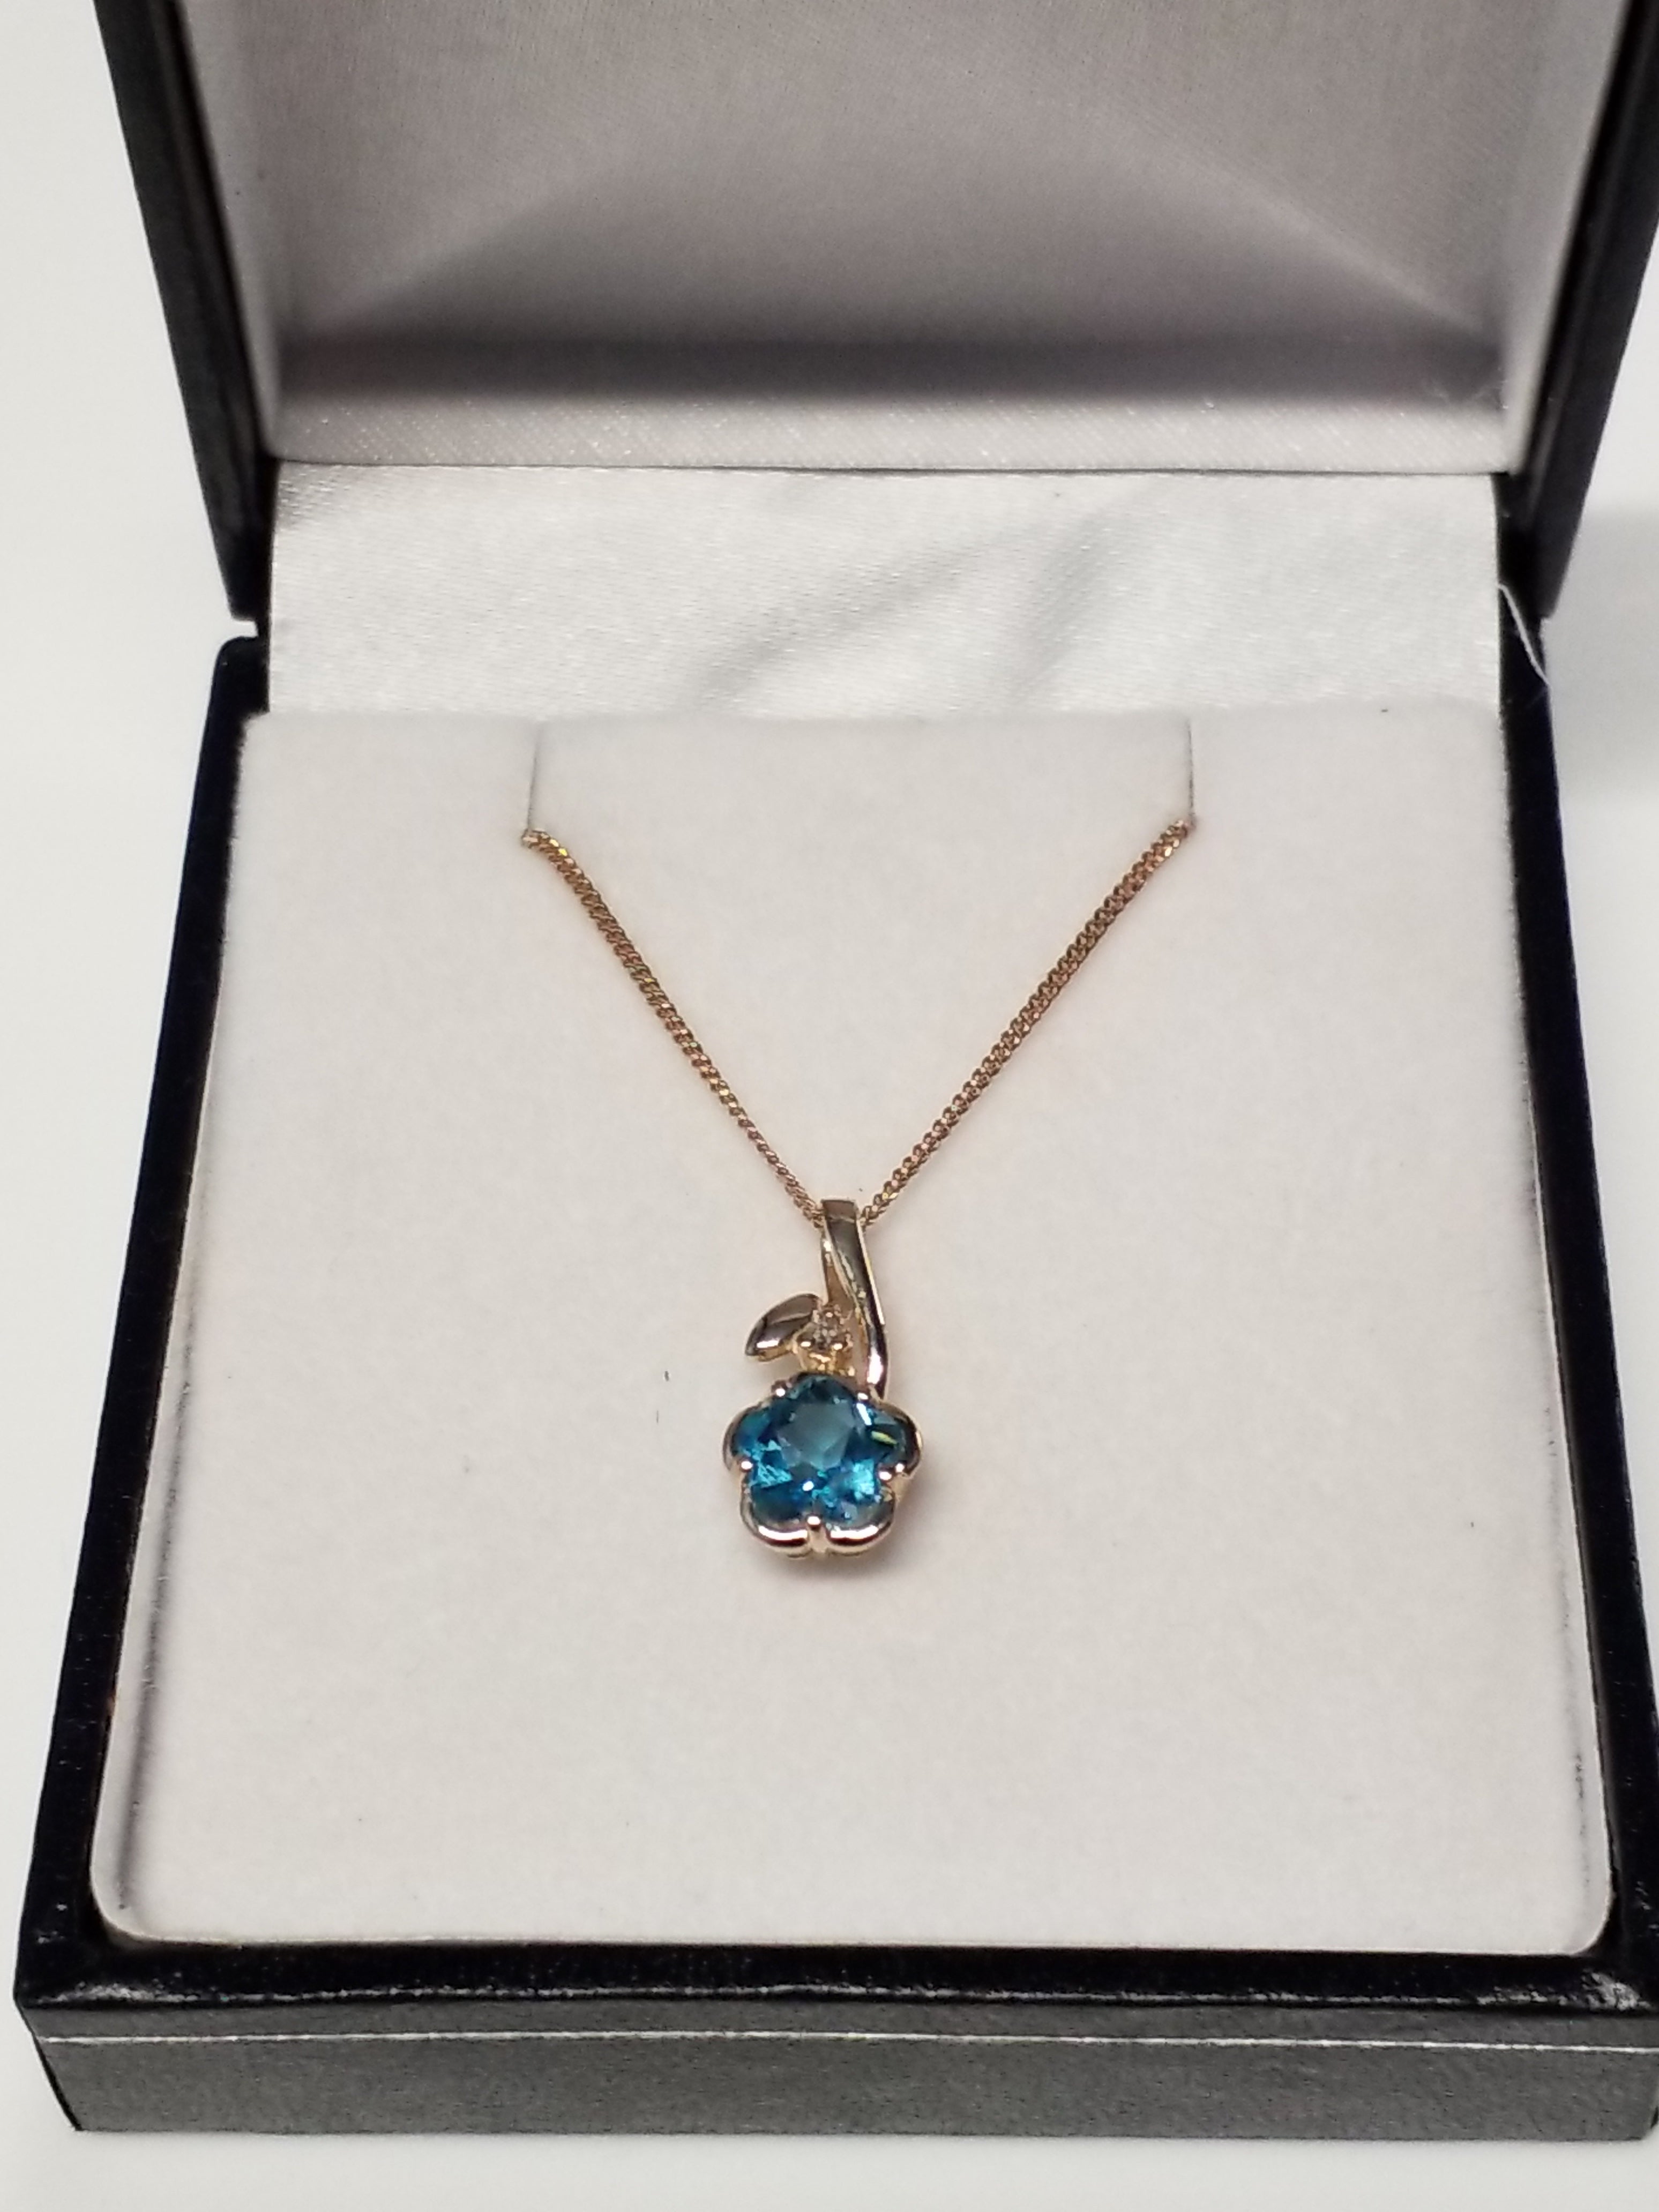 Floral Cut Blue Topaz Pendant Flower - Matching earrings available